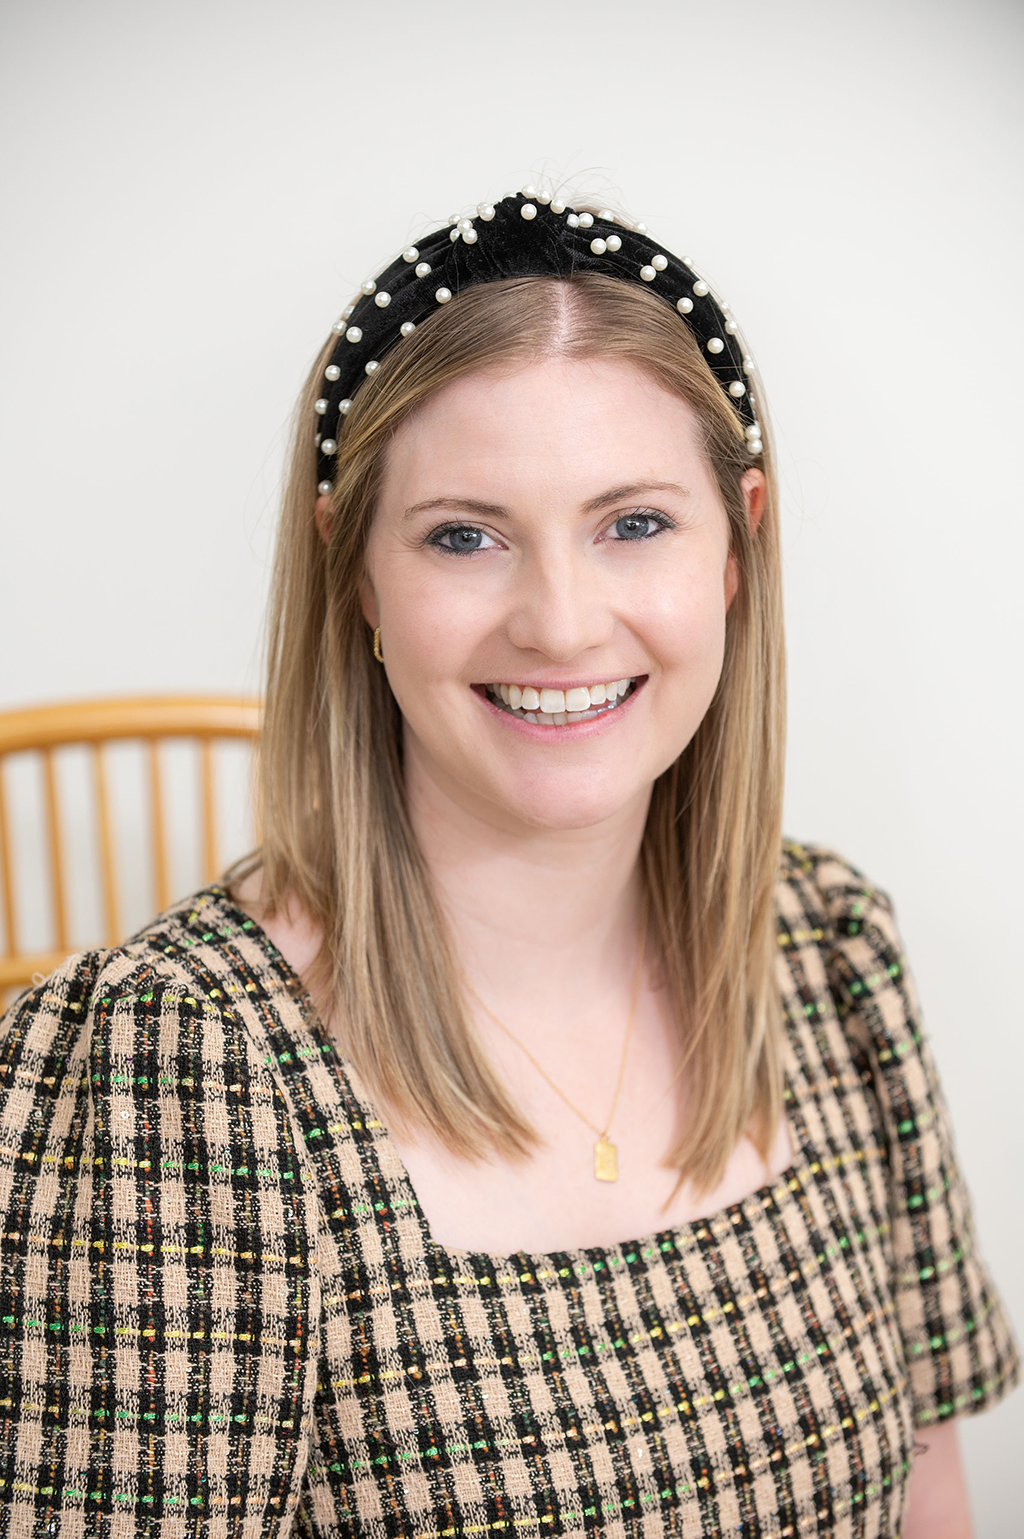 Curated gift box business Marigold & Grey welcomes Account Executive Clair